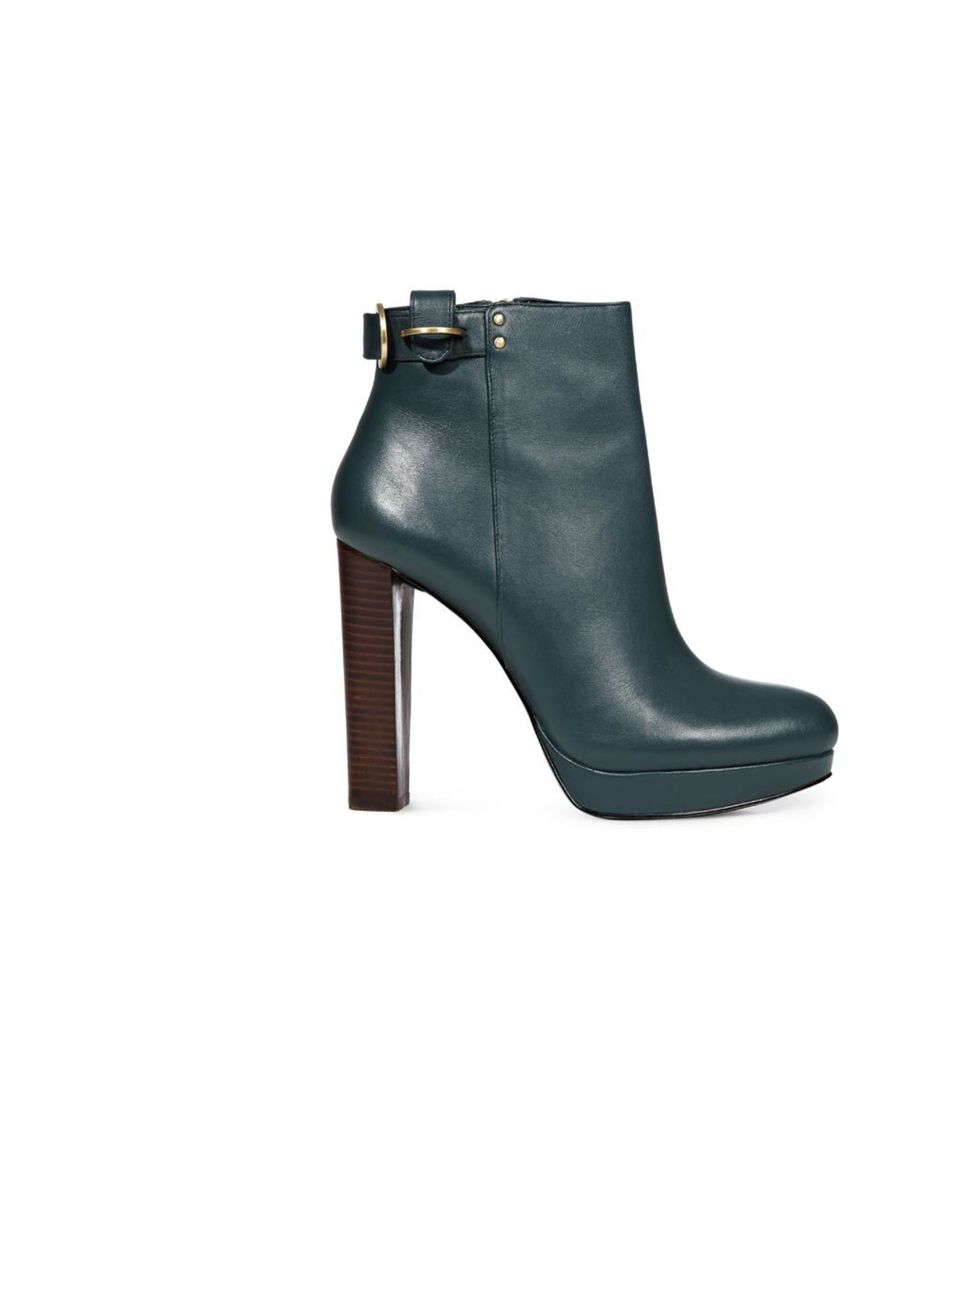 <p><a href="http://www.reiss.com/womens/shoes/boots/bailly/petrol/">Reiss</a> 'Bailly' ankle boot, £195</p>